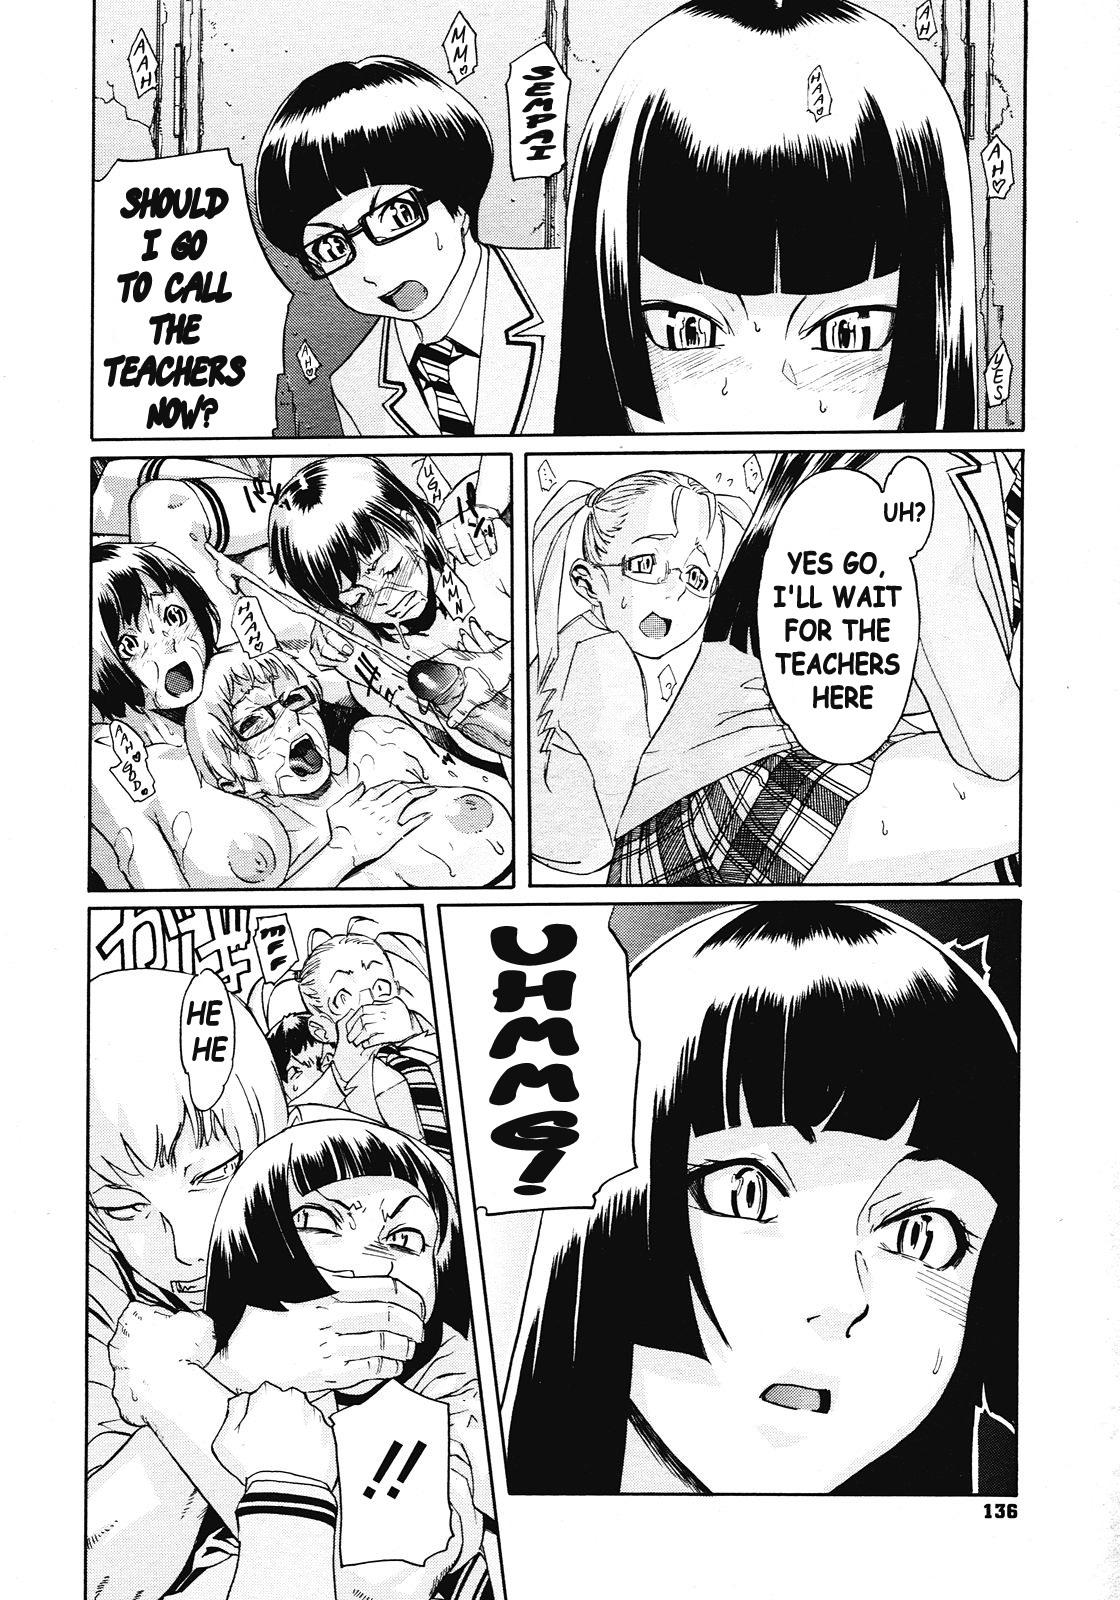 With Kandahara Out of Control Best Blowjob - Page 8